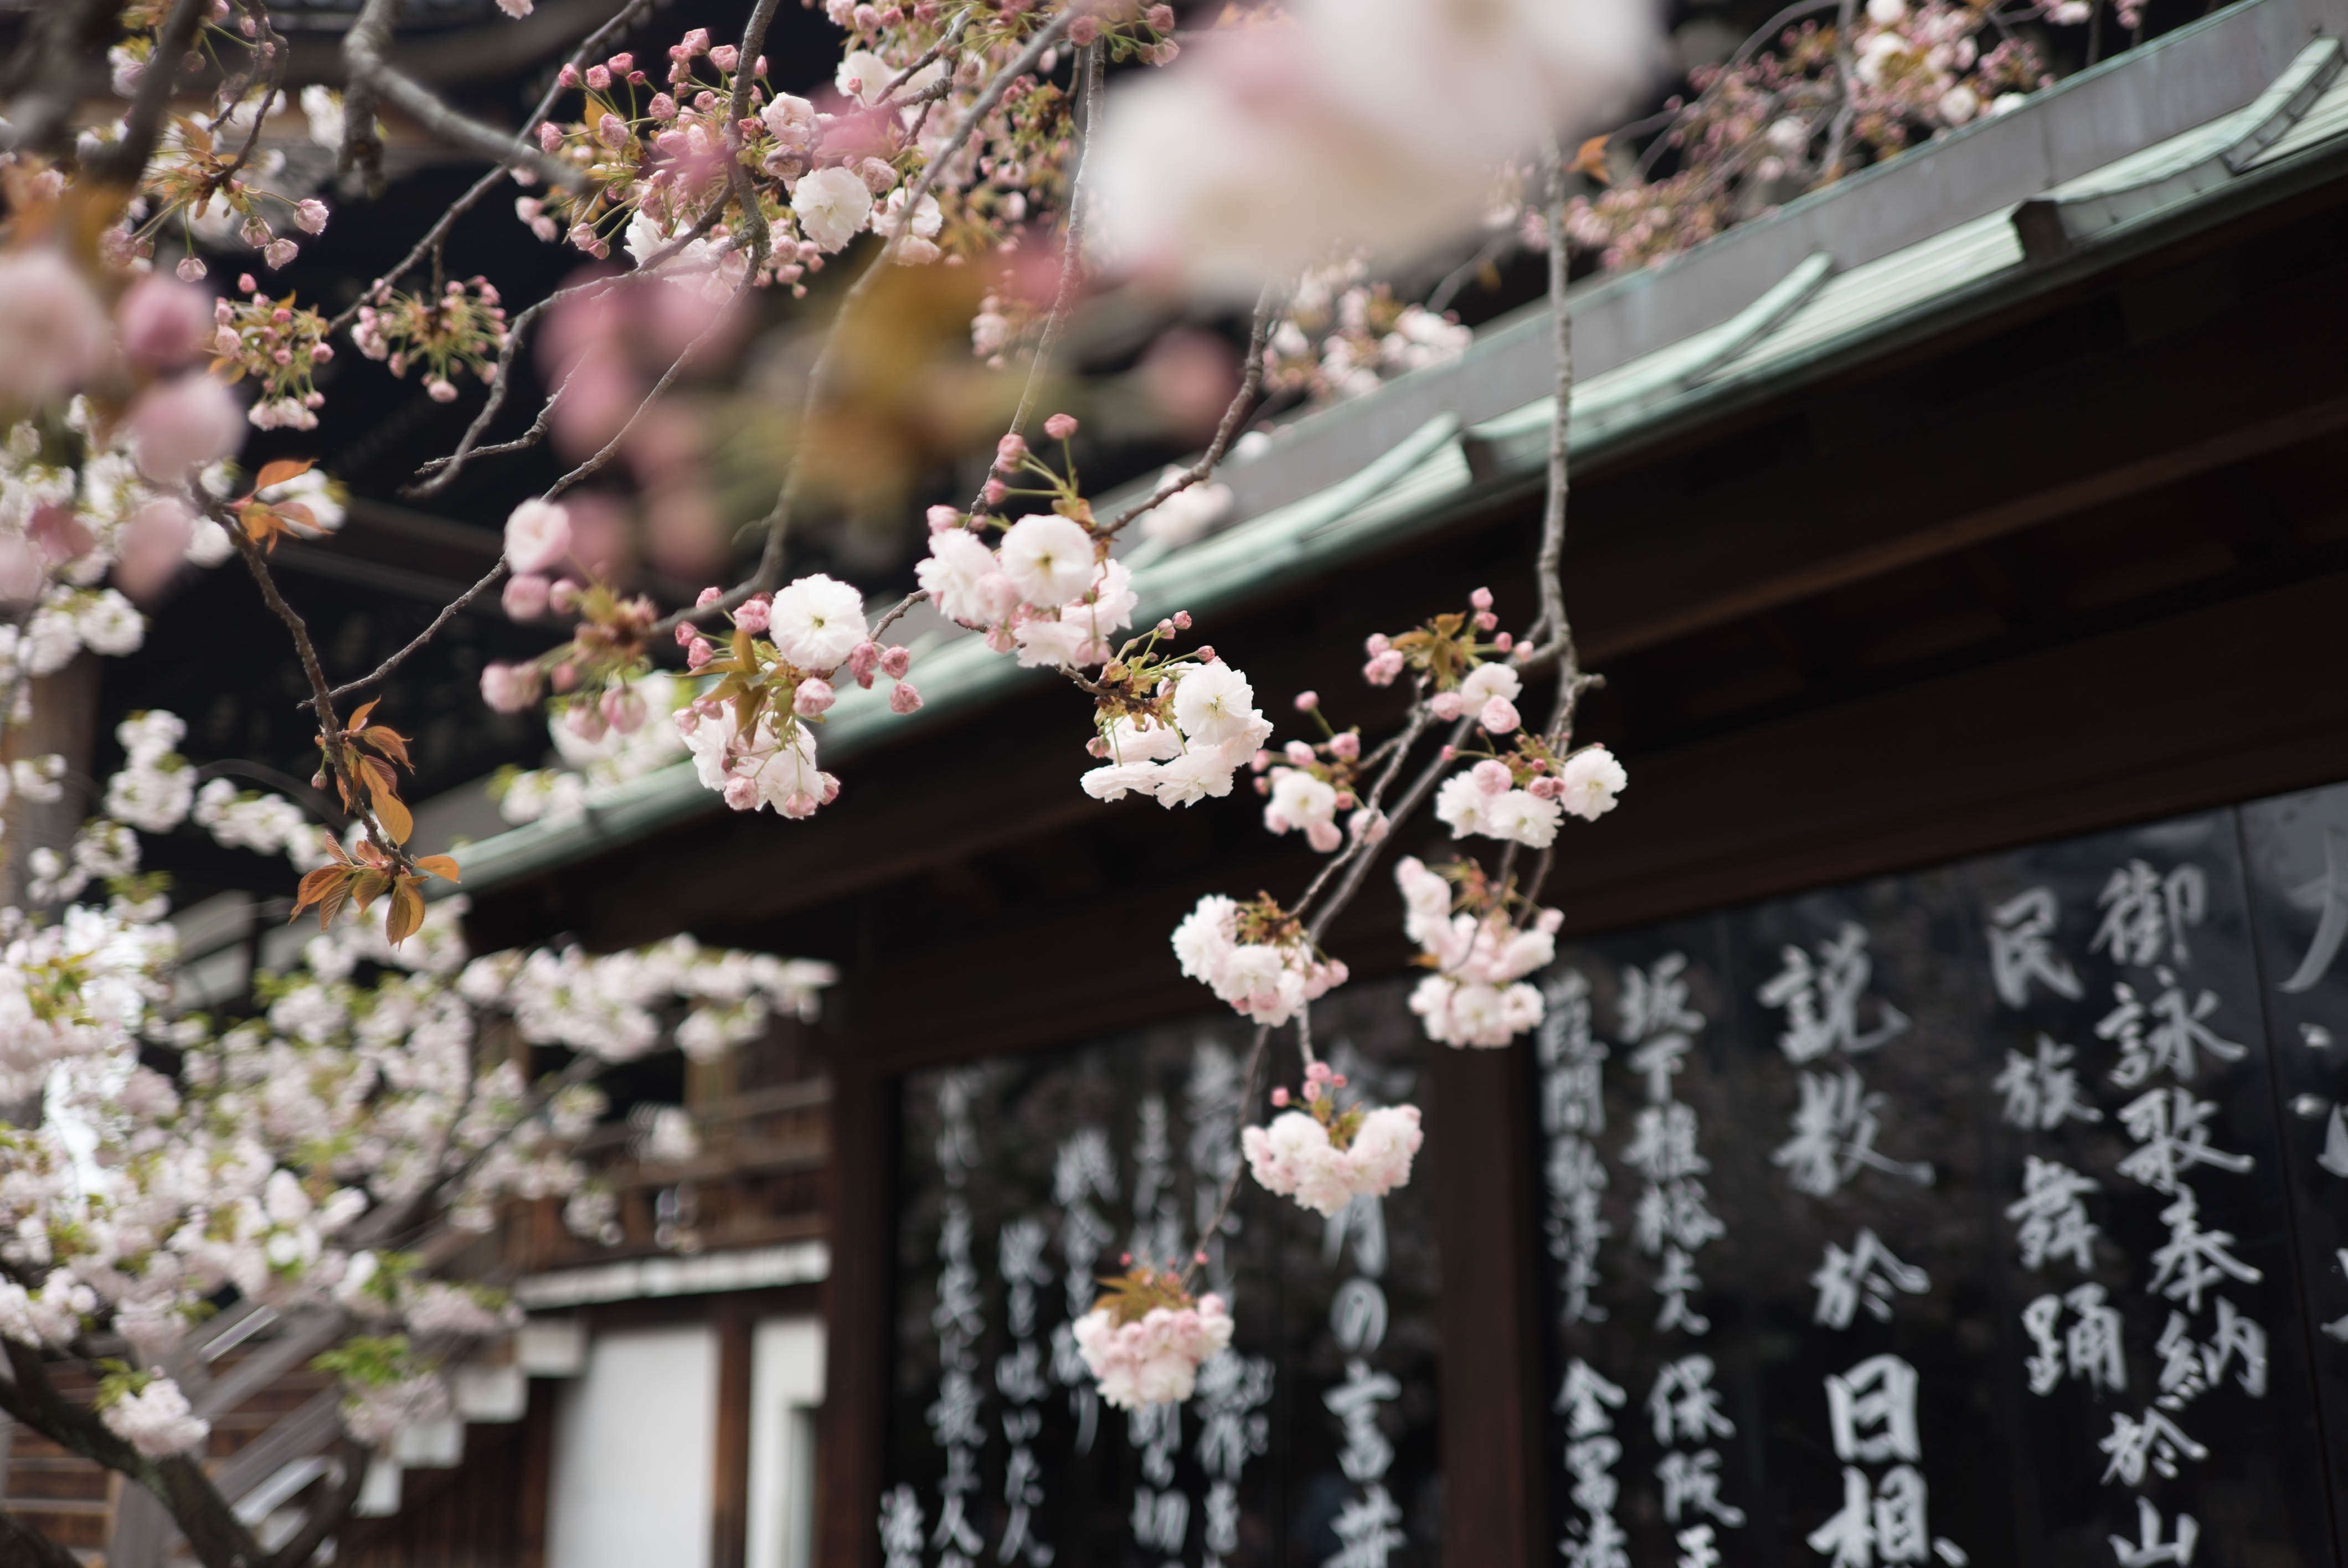 Pink flowers on a tree branch in front of a building - Cherry blossom